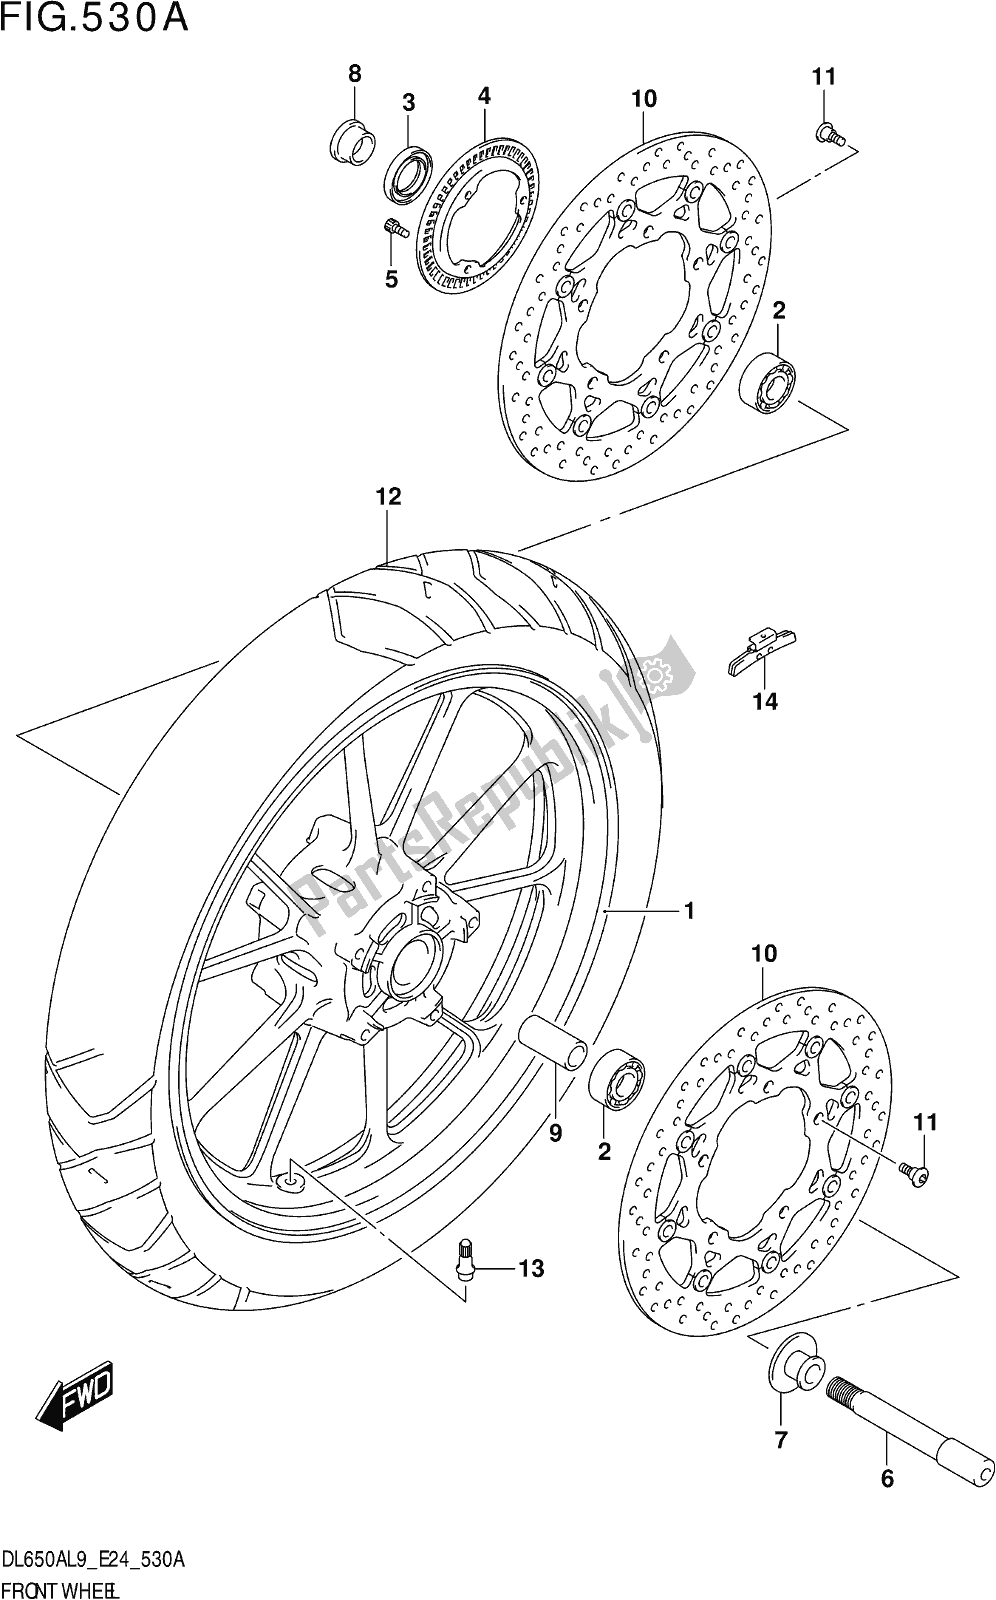 All parts for the Fig. 530a Front Wheel (dl650a,dl650aue) of the Suzuki DL 650A V Strom 2019